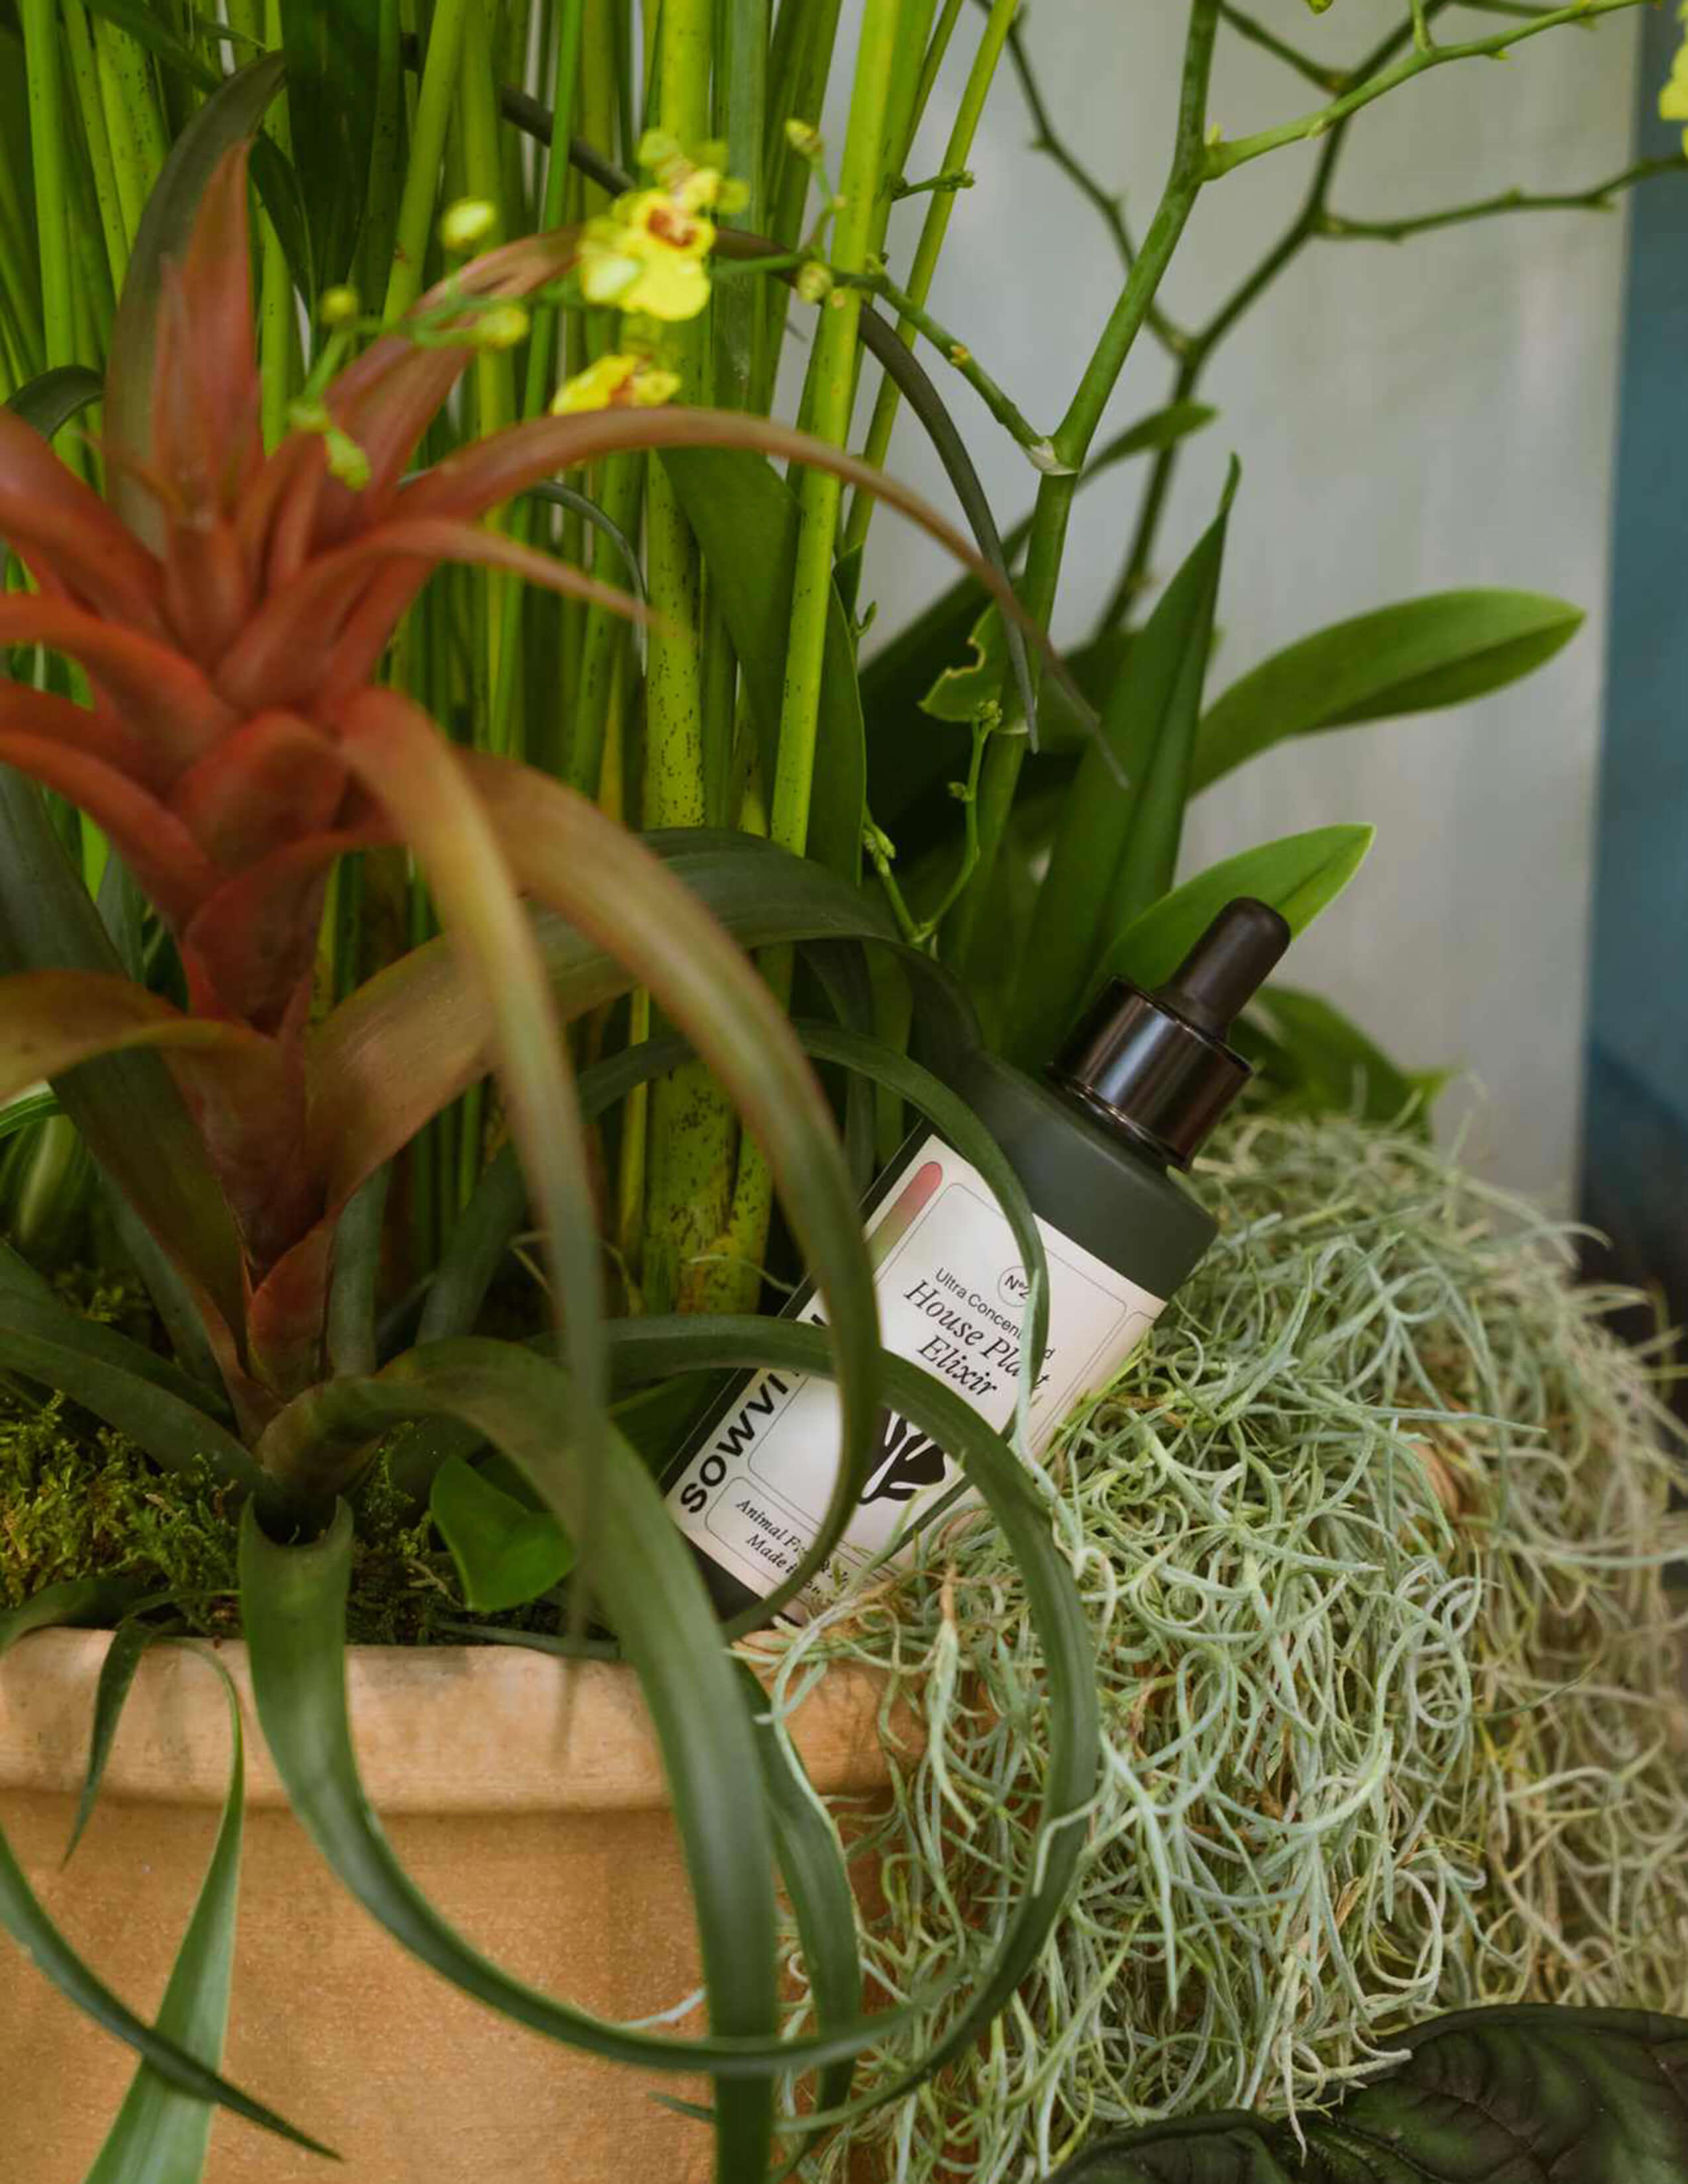 The Sowvital product - house plant elixir next to Guzmania and a few different kinds of flowers and plants on the pot.